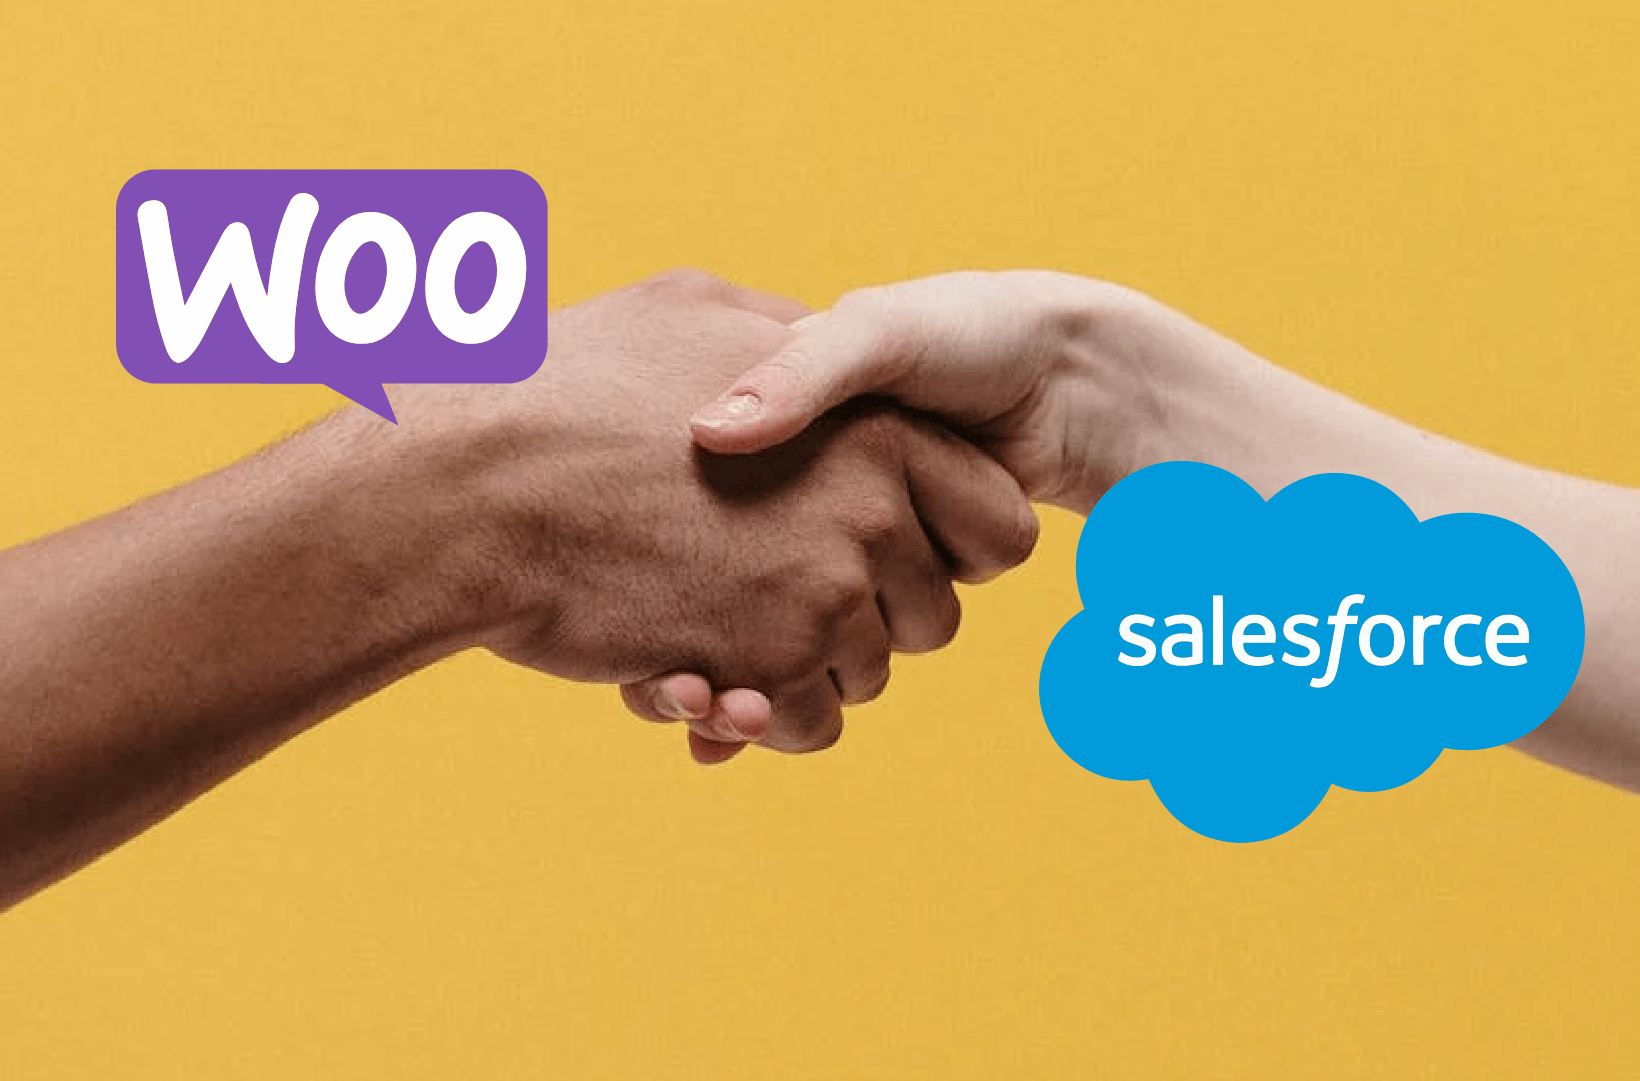 Essential Steps to Integrate Salesforce and WooCommerce